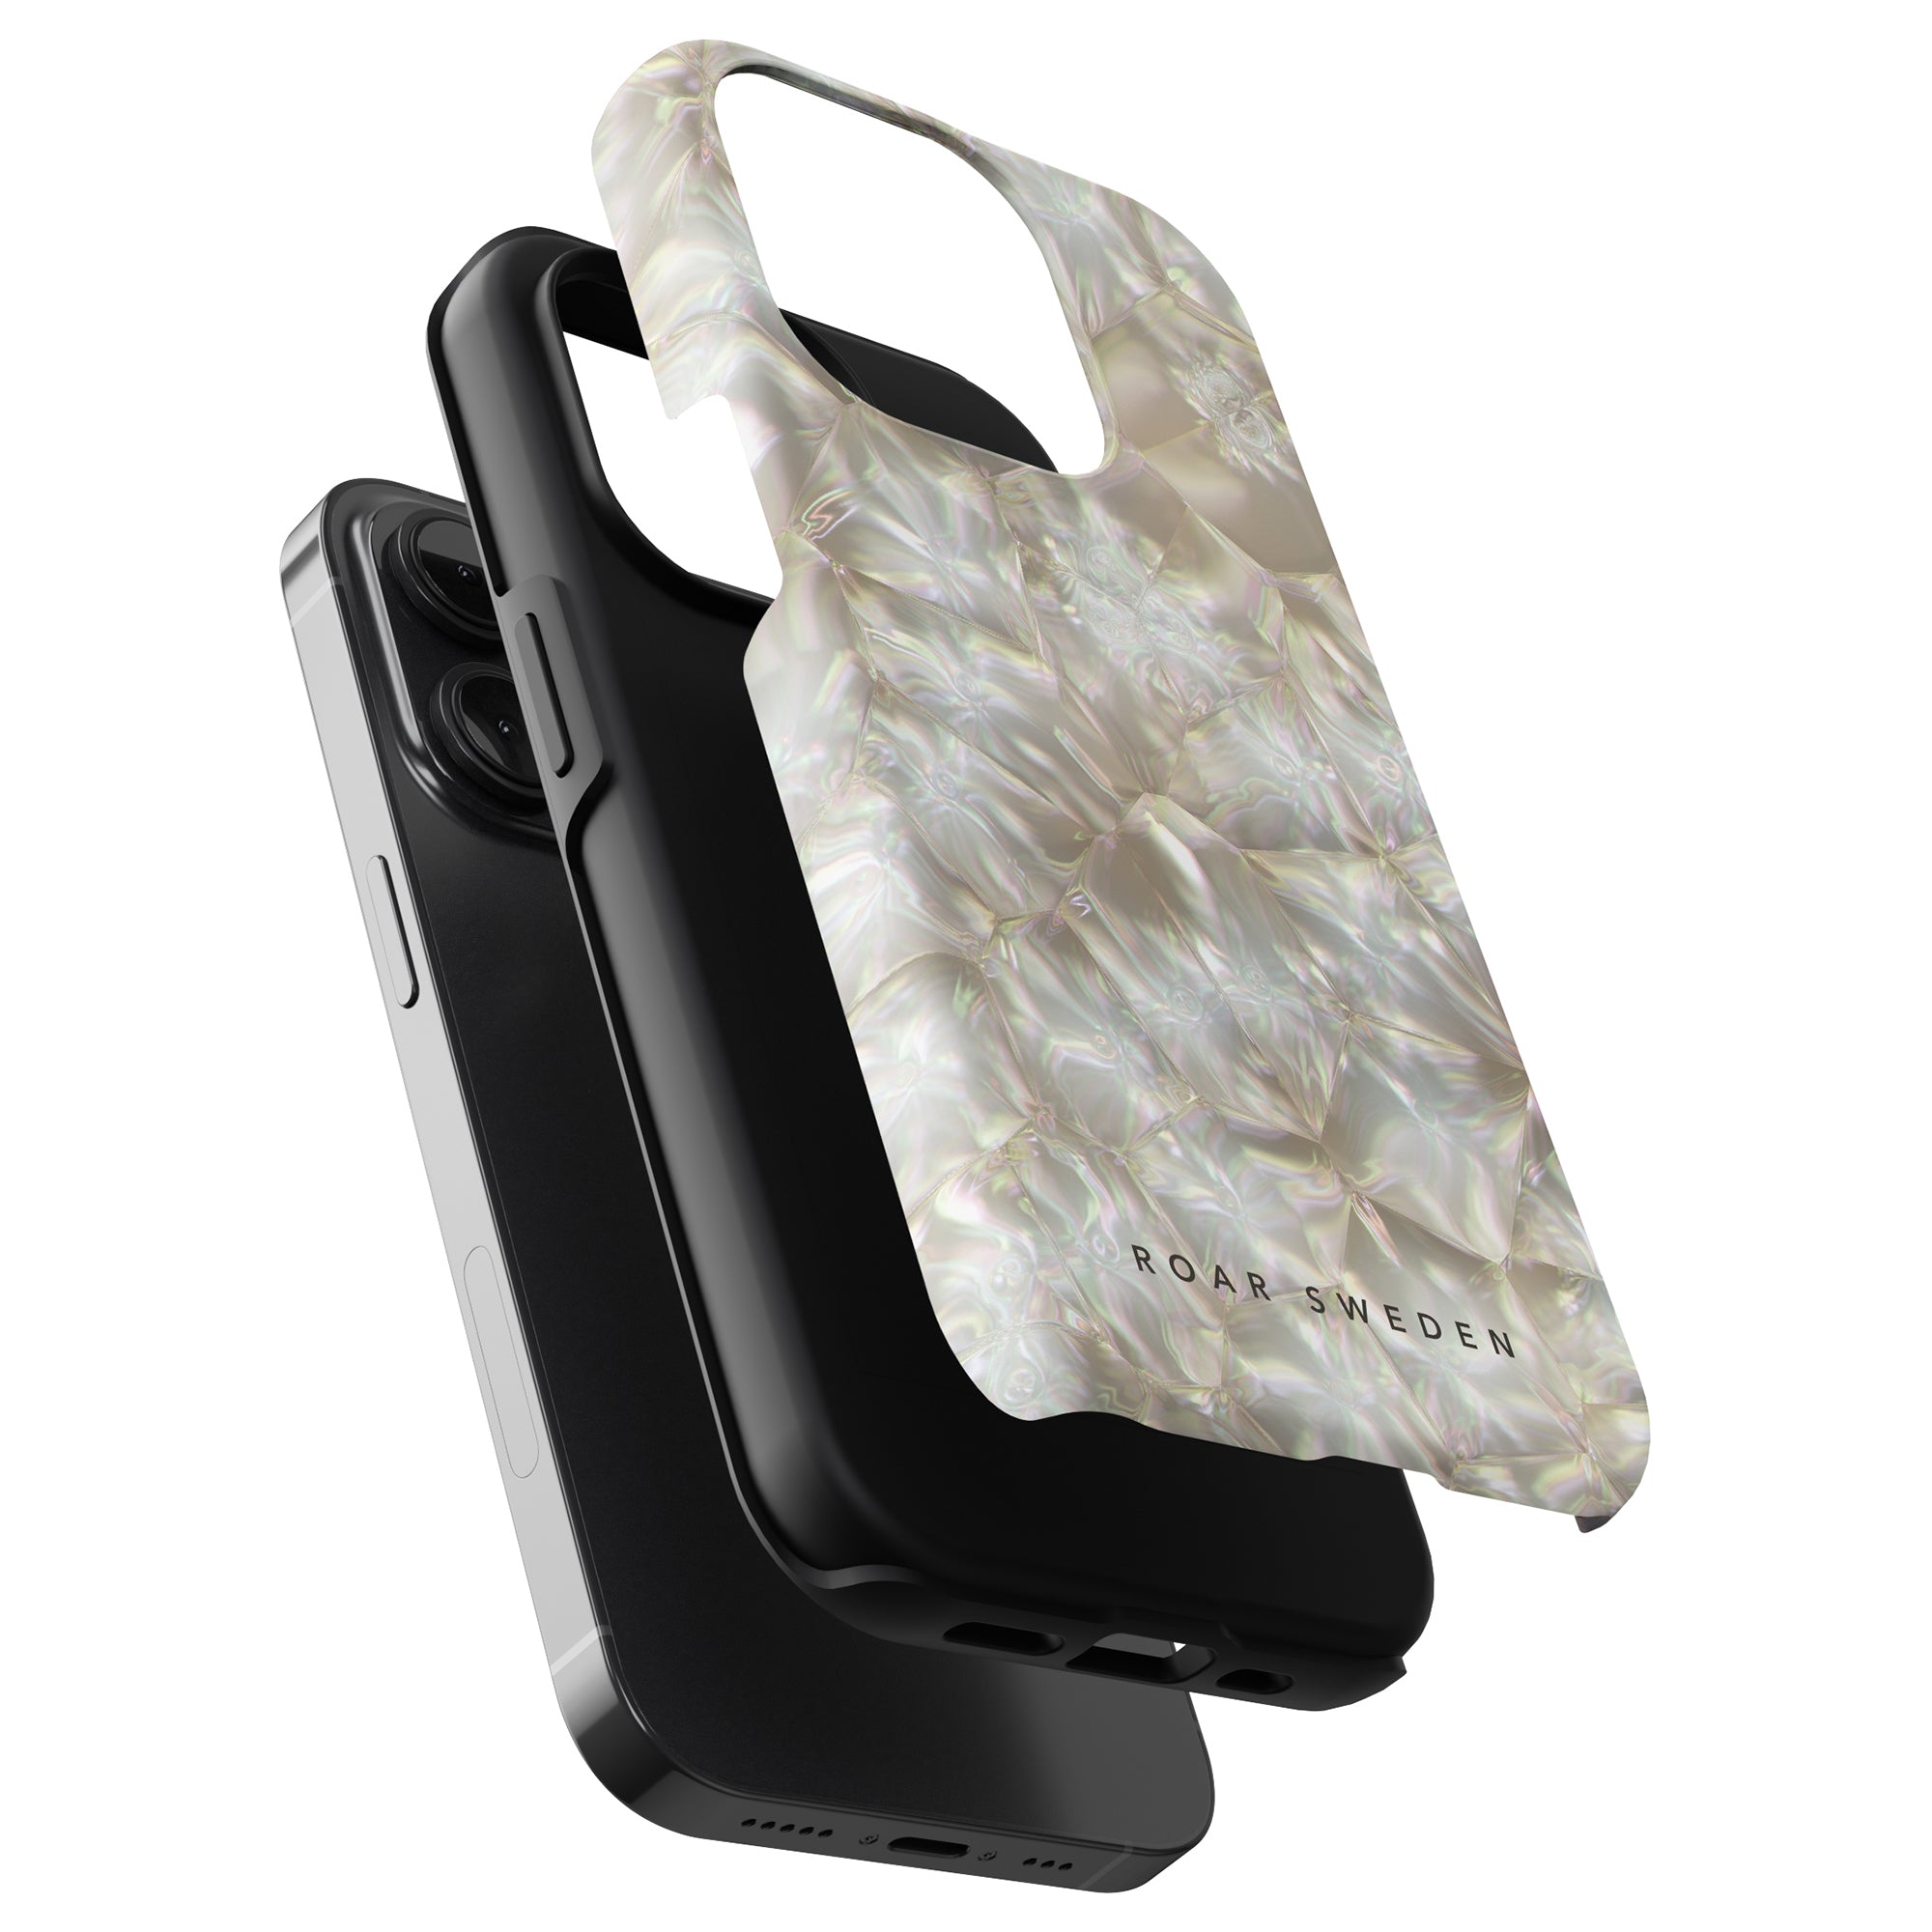 Two smartphones in black tough cases, one with a Pearls - Tough Case attached, isolated on a white background.